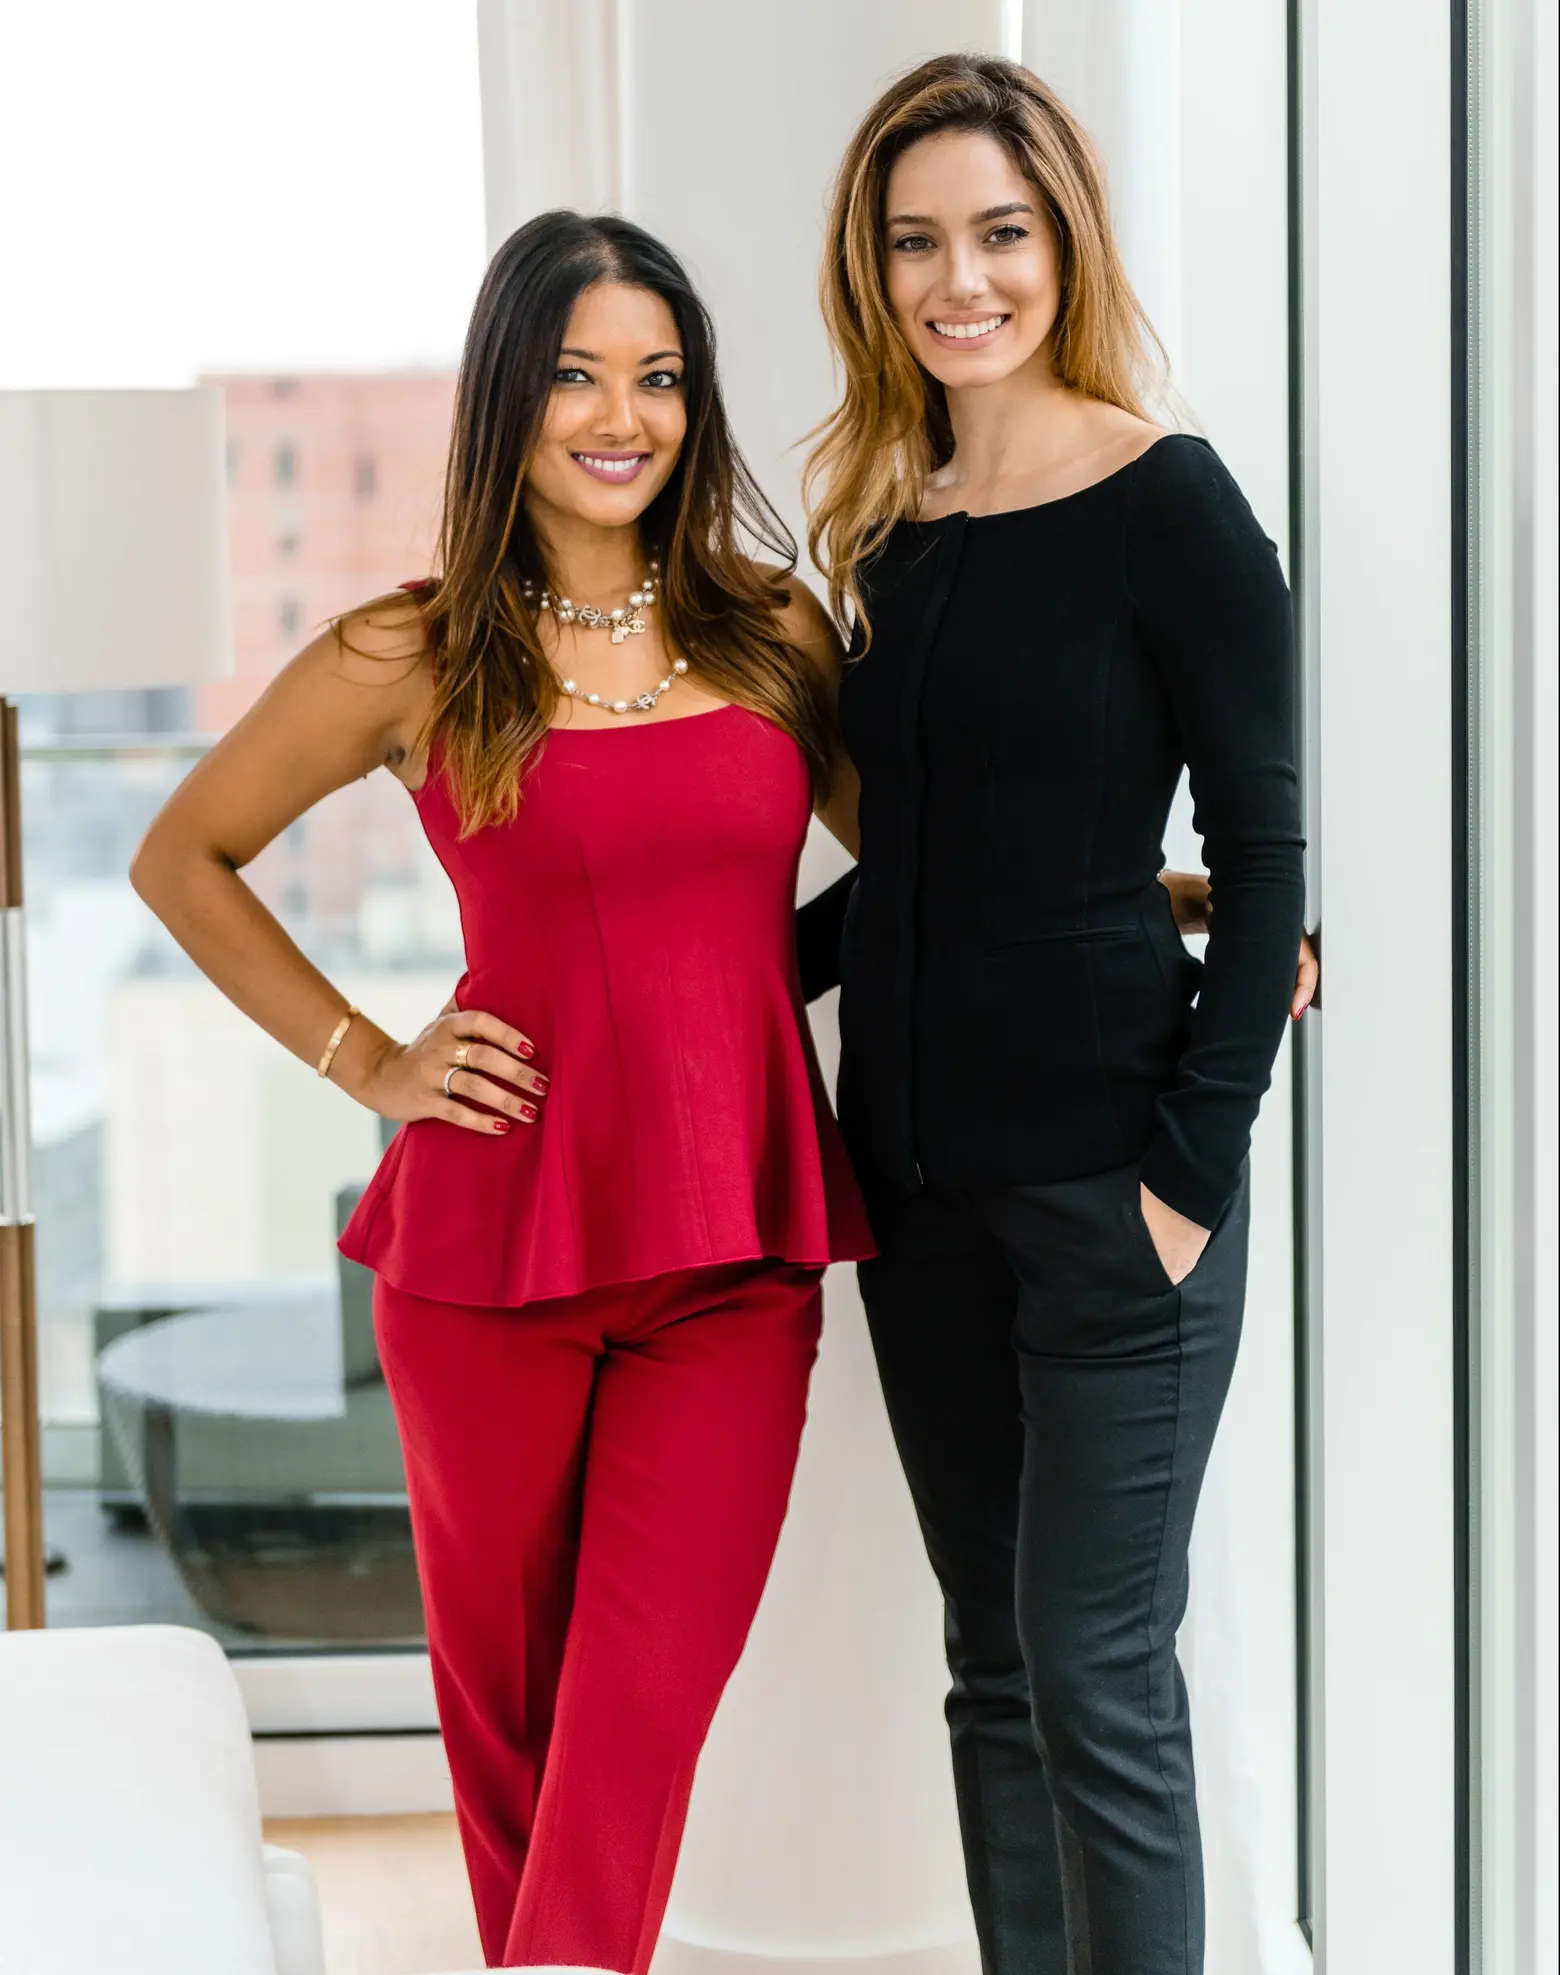 Meet Candice and Malessa, real estate's 'new generation' of brokers ...